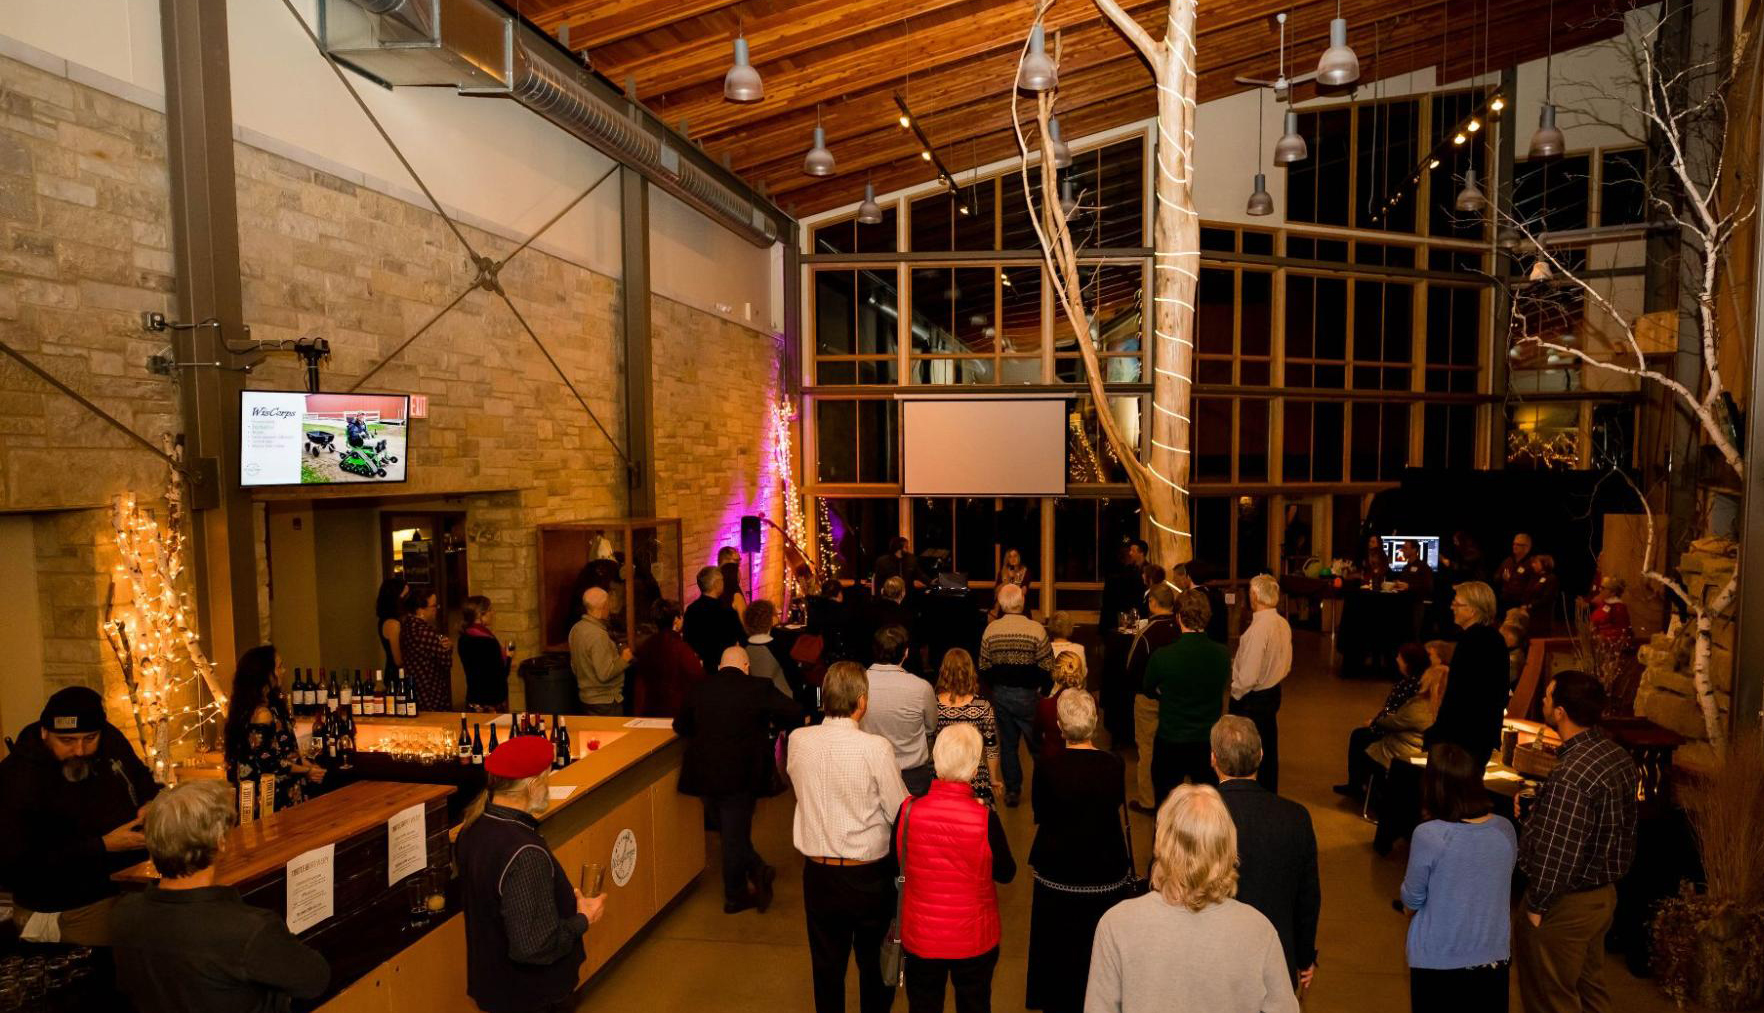 Photo Credit: Ladybug Photography Photo Description: The Atrium is filled with people for a late-night event. Lights are strung zig-zagged across the whole room, and the front desk has been turned into a bar area.